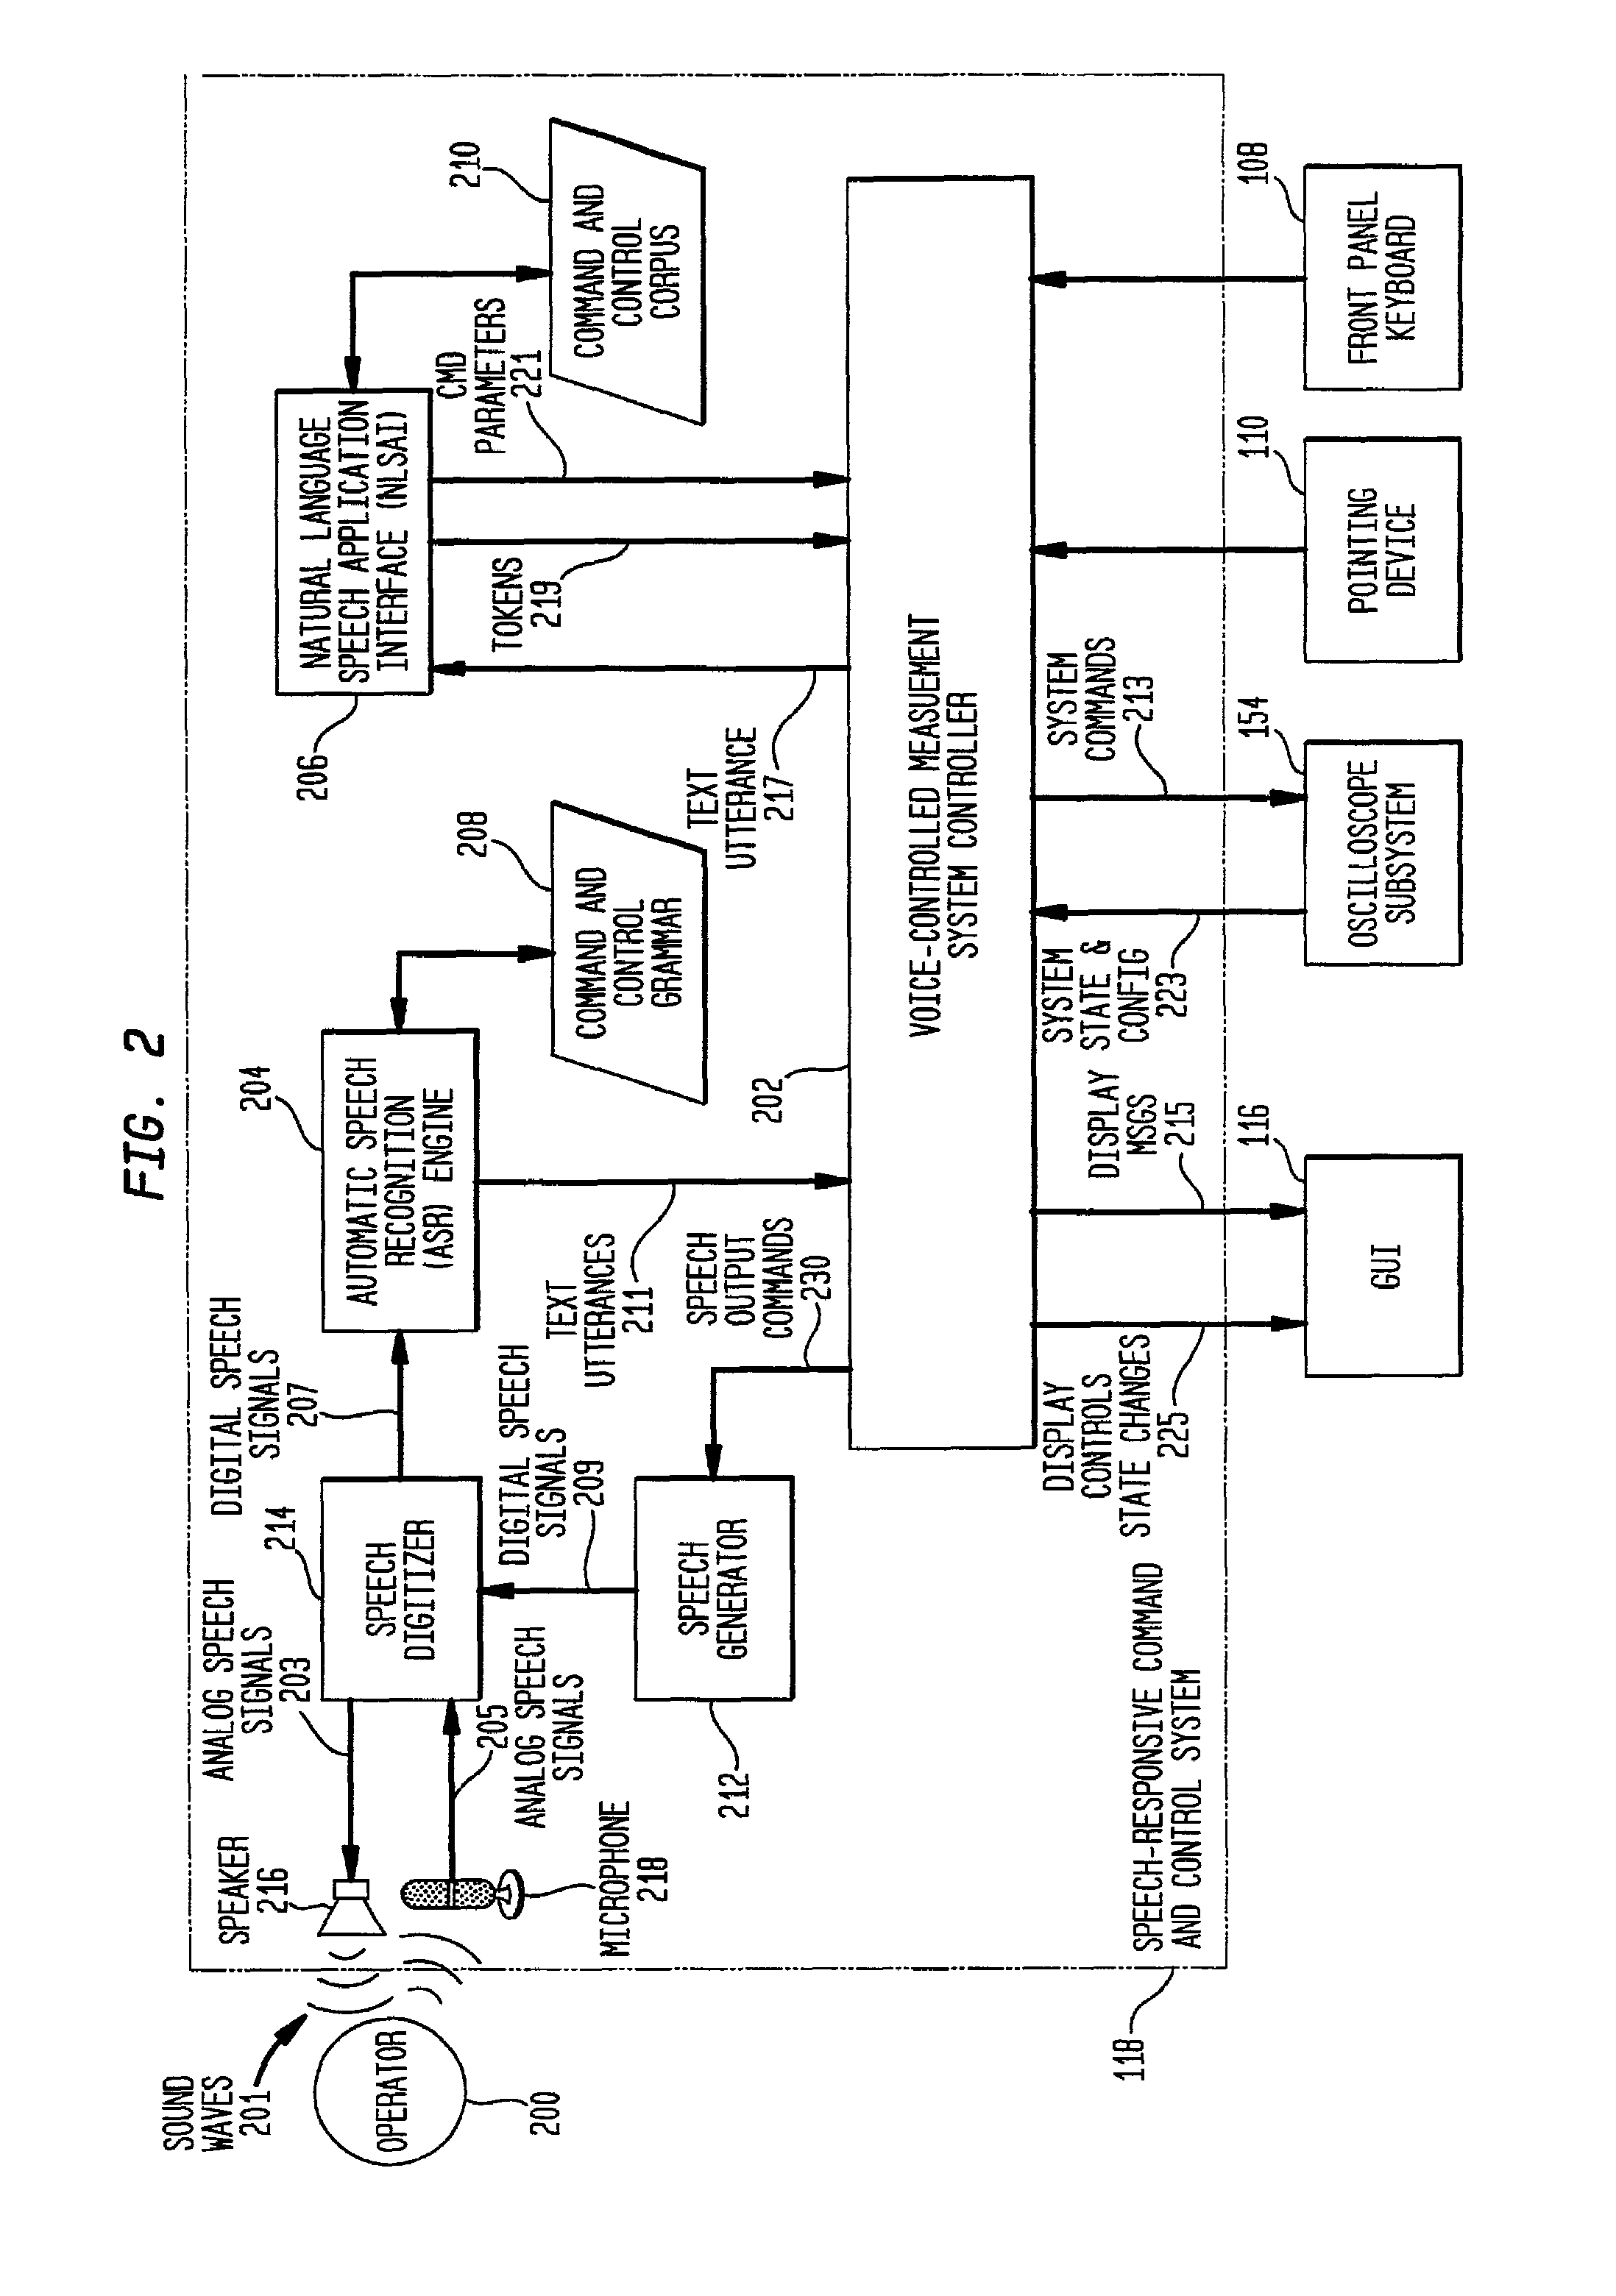 Voice-responsive command and control system and methodology for use in a signal measurement system